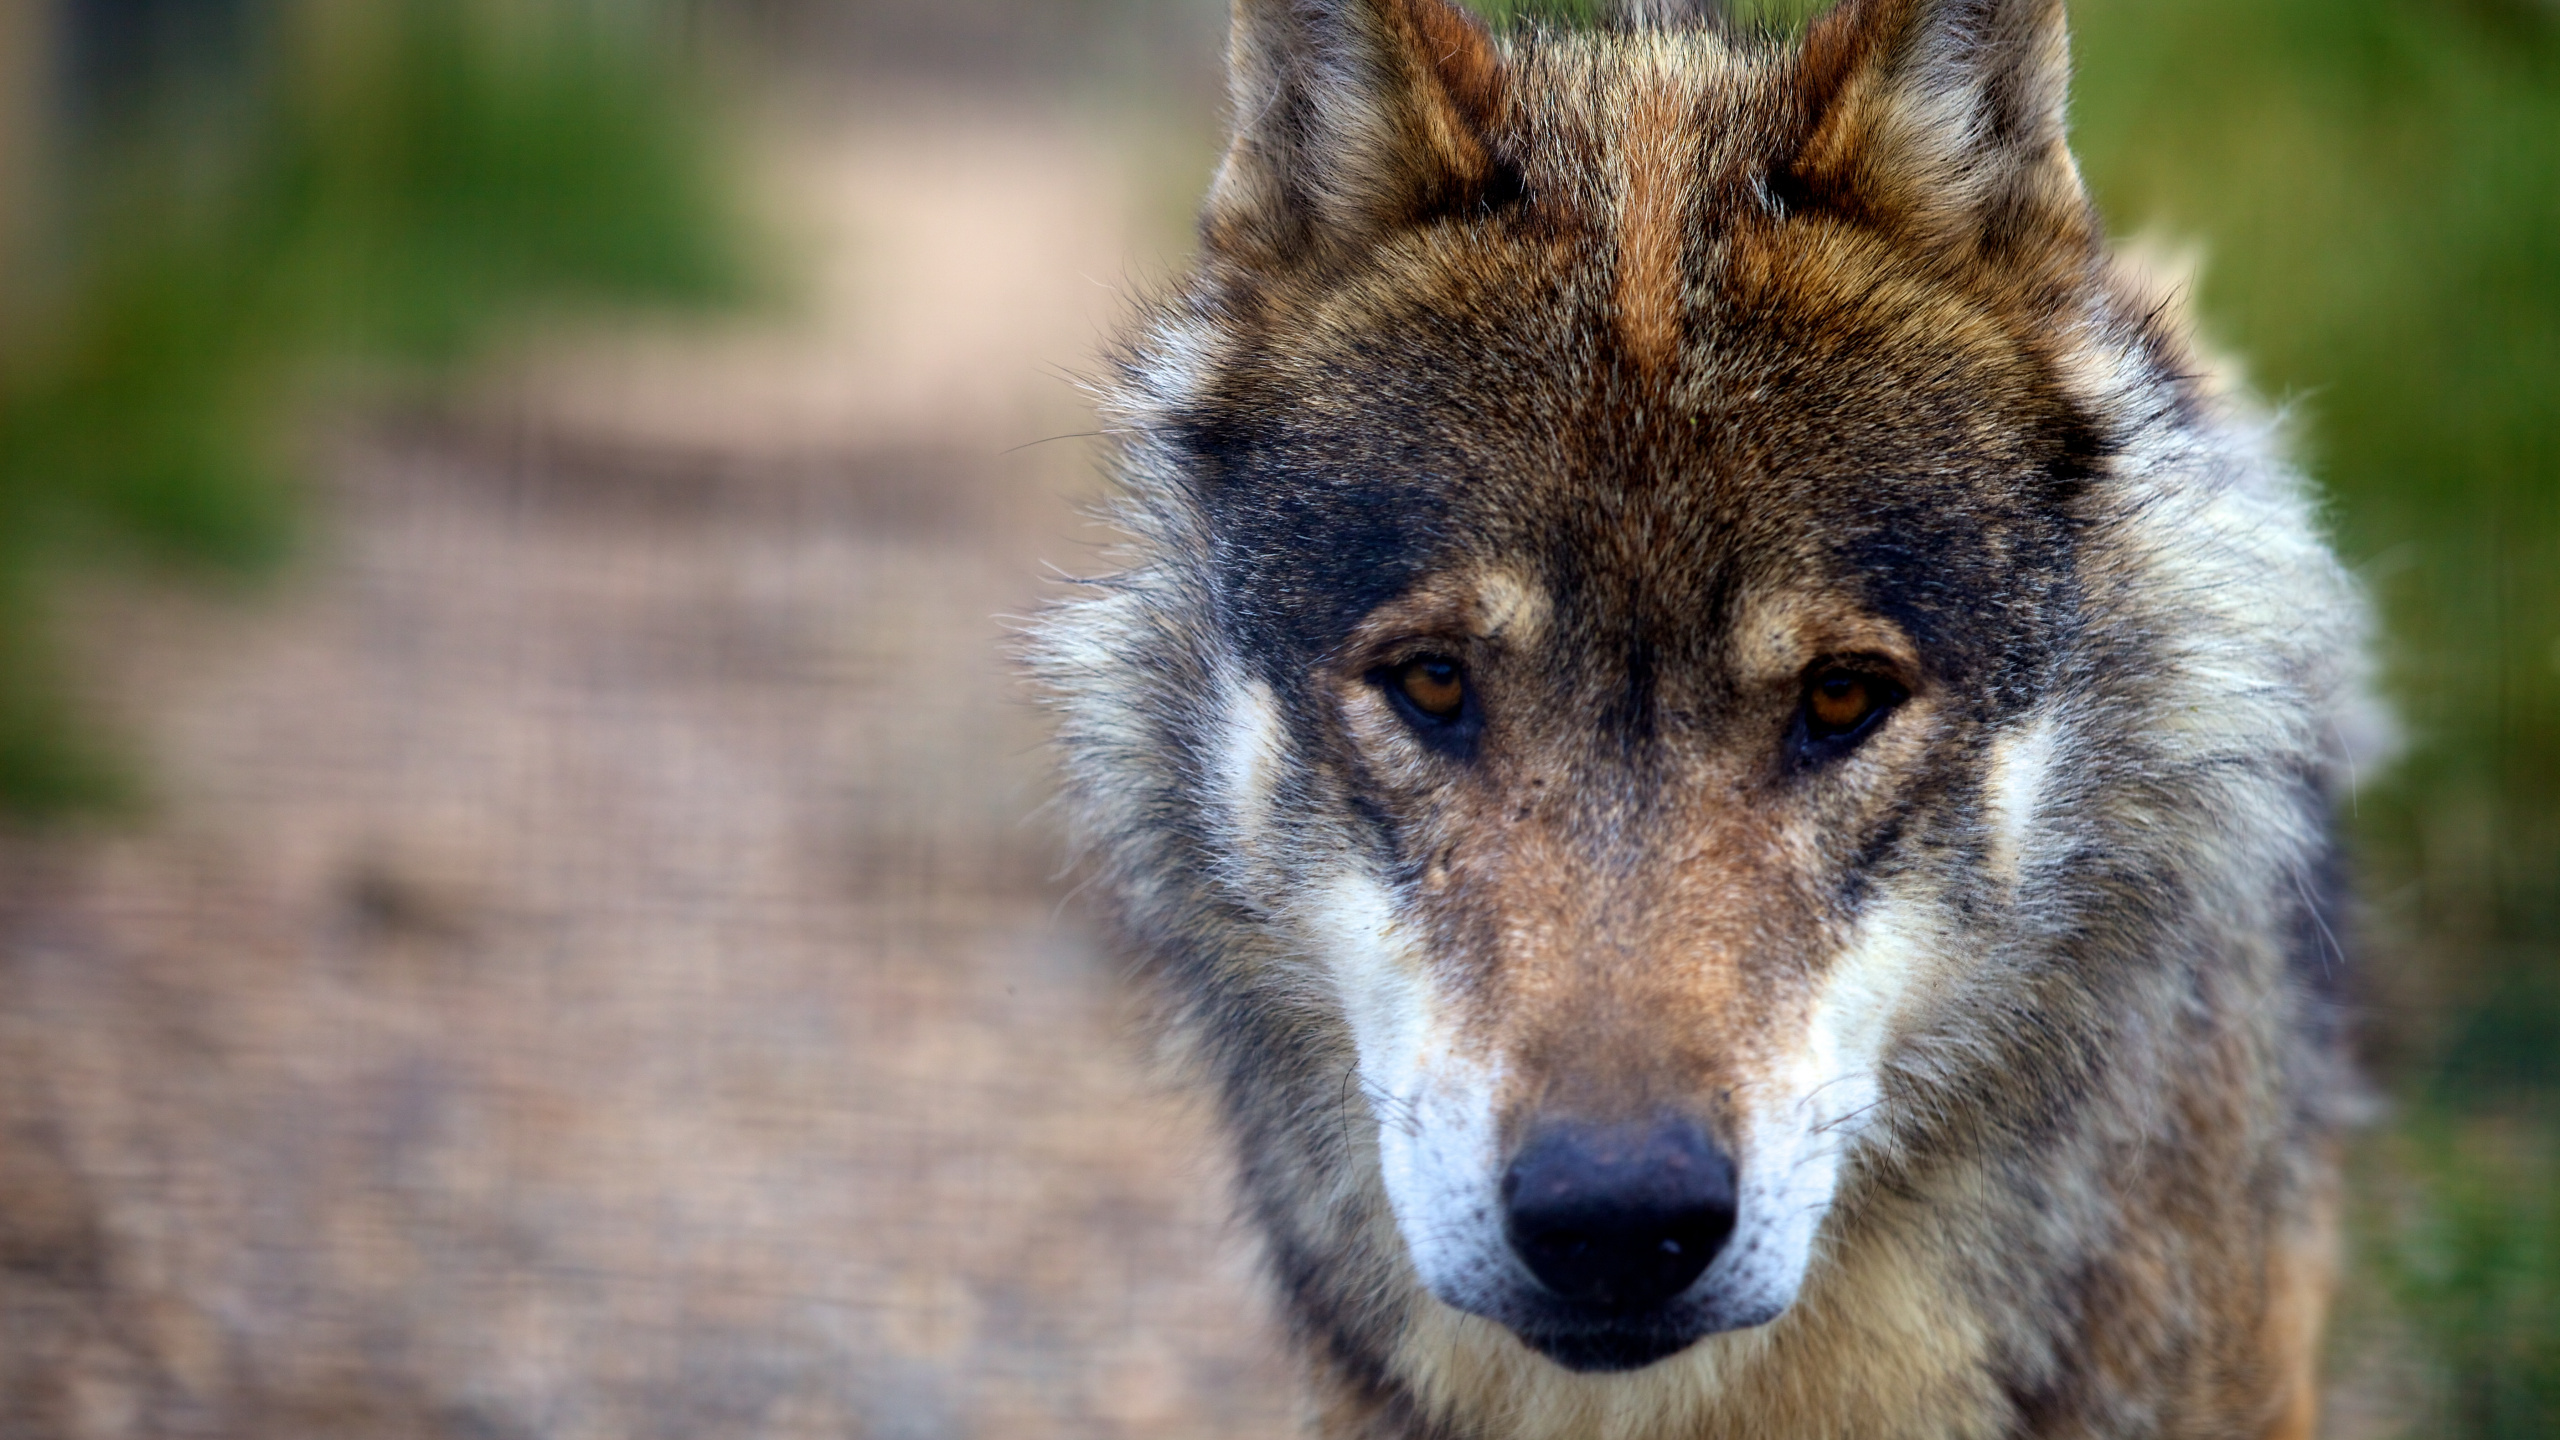 Brown and Black Wolf in Close up Photography. Wallpaper in 2560x1440 Resolution